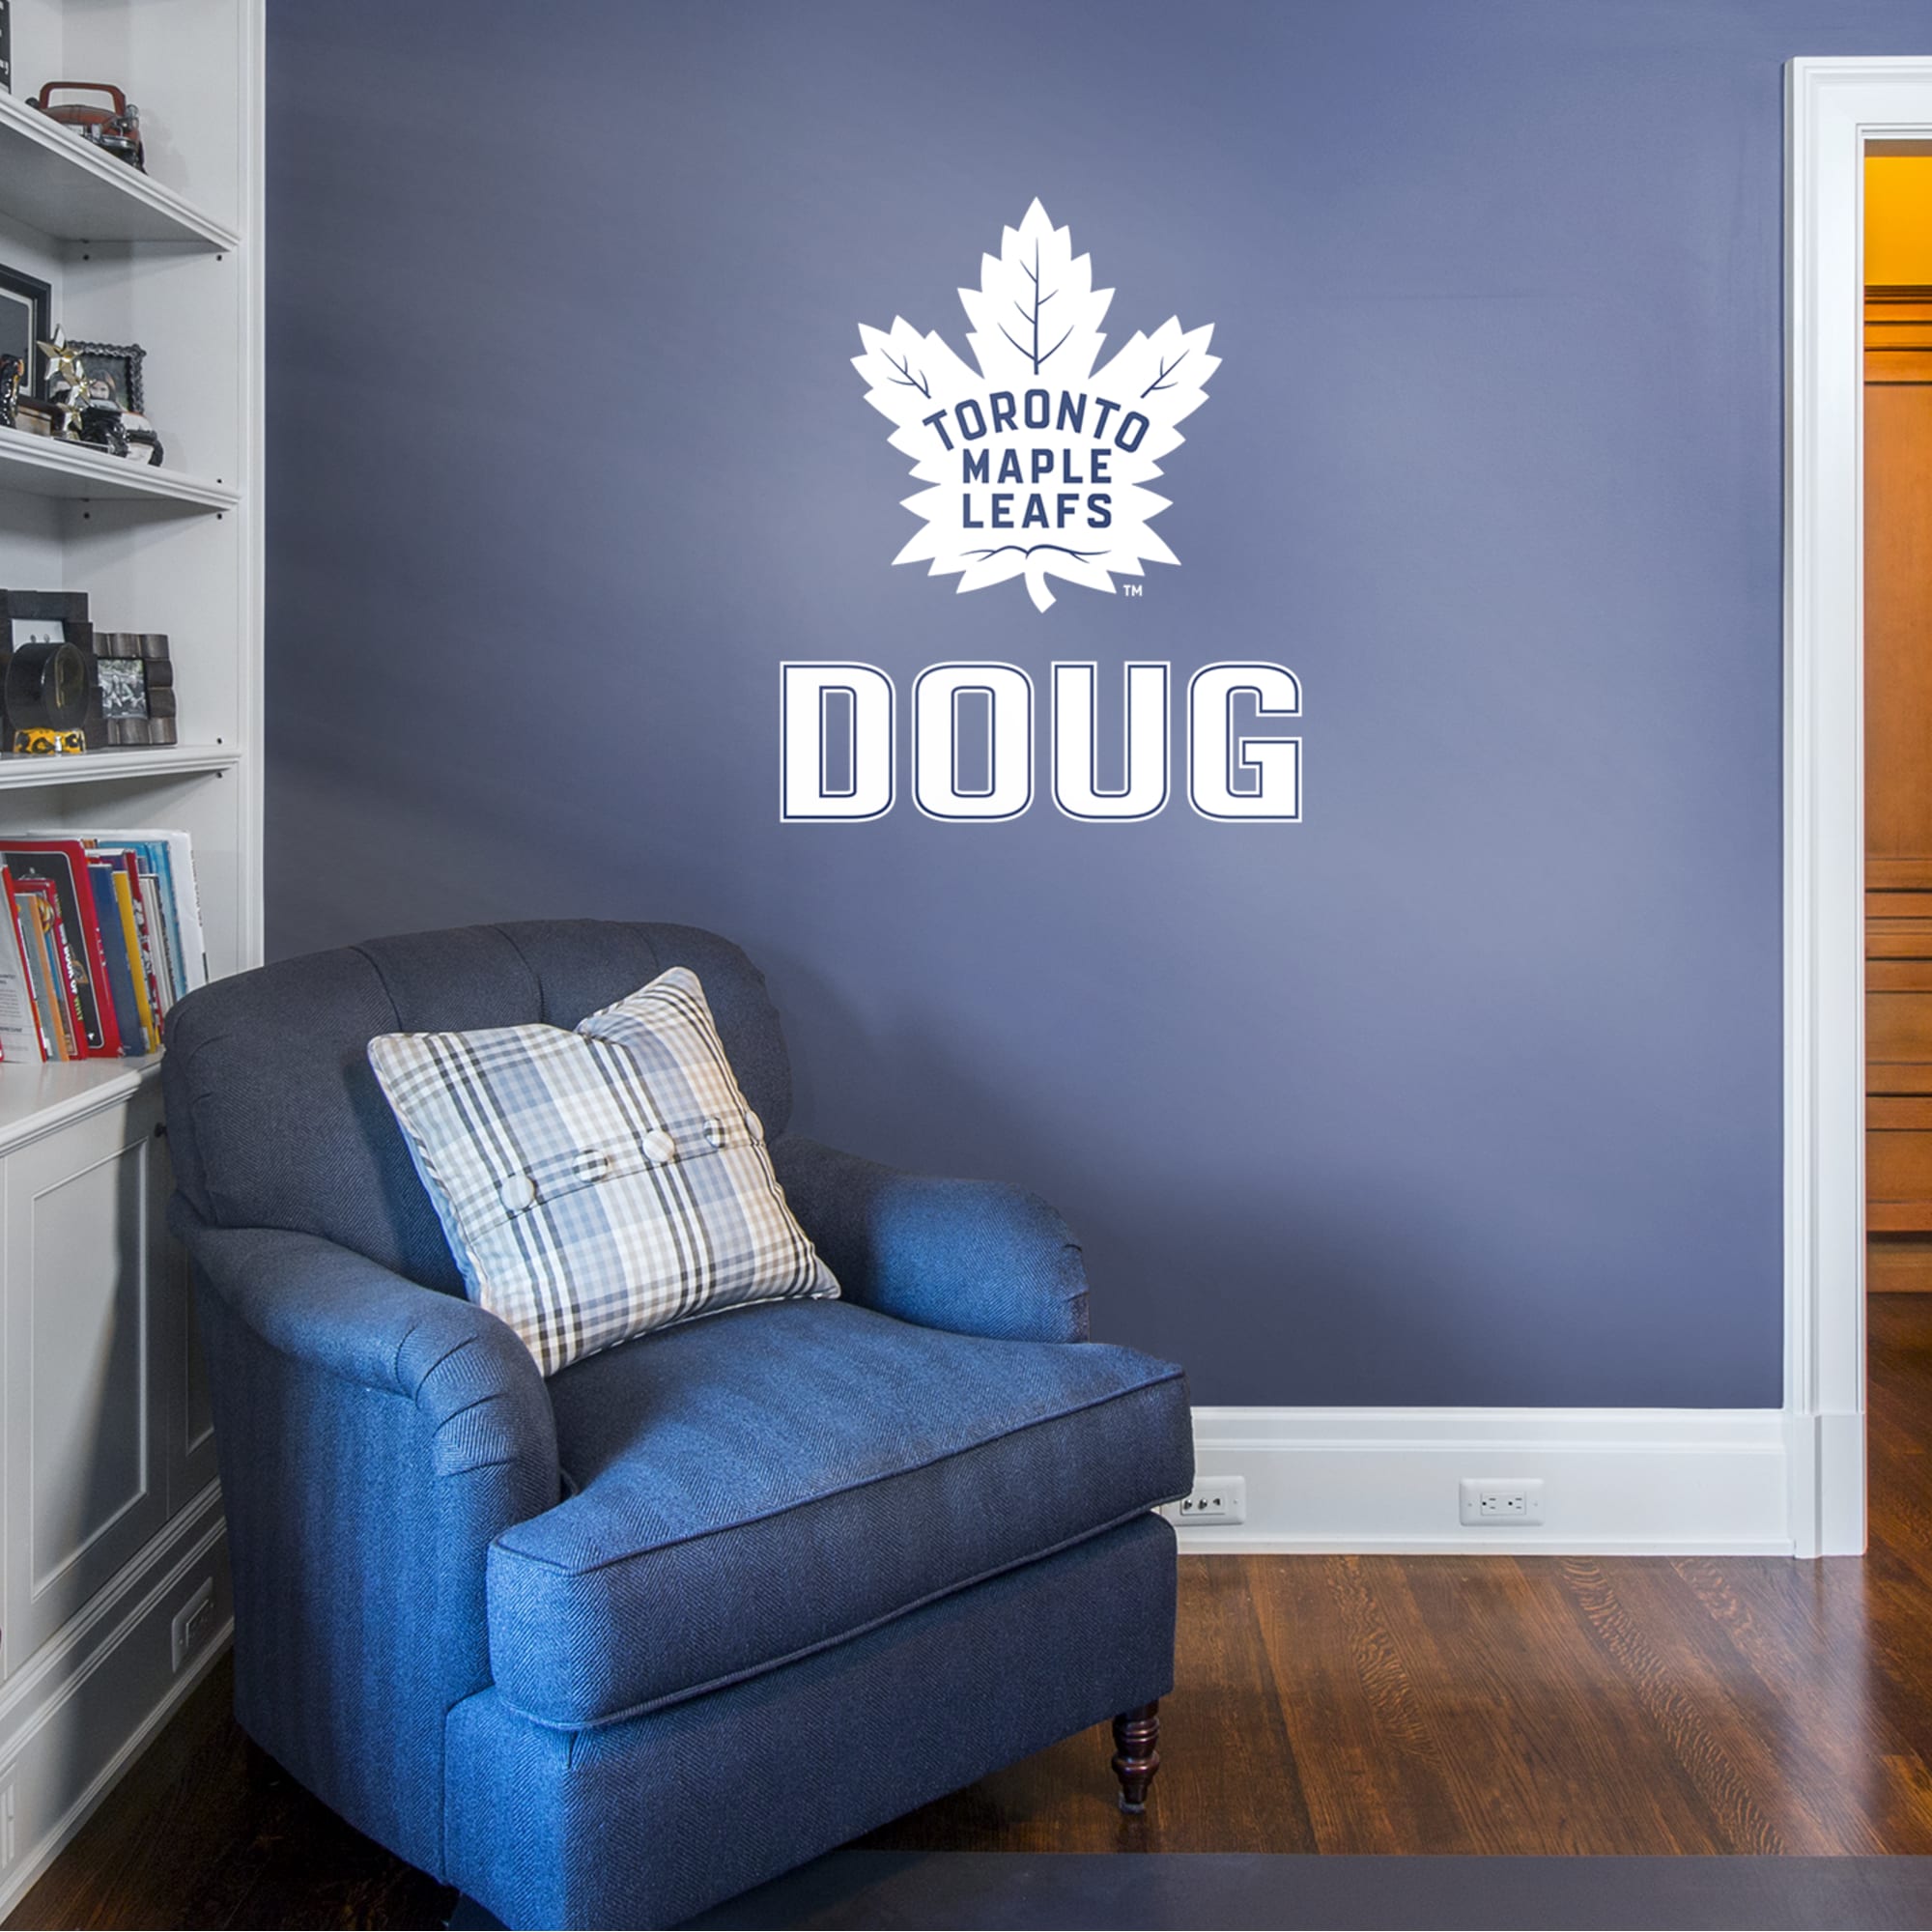 Toronto Maple Leafs: Stacked Personalized Name - Officially Licensed NHL Transfer Decal in White/White (39.5"W x 52"H) by Fathea